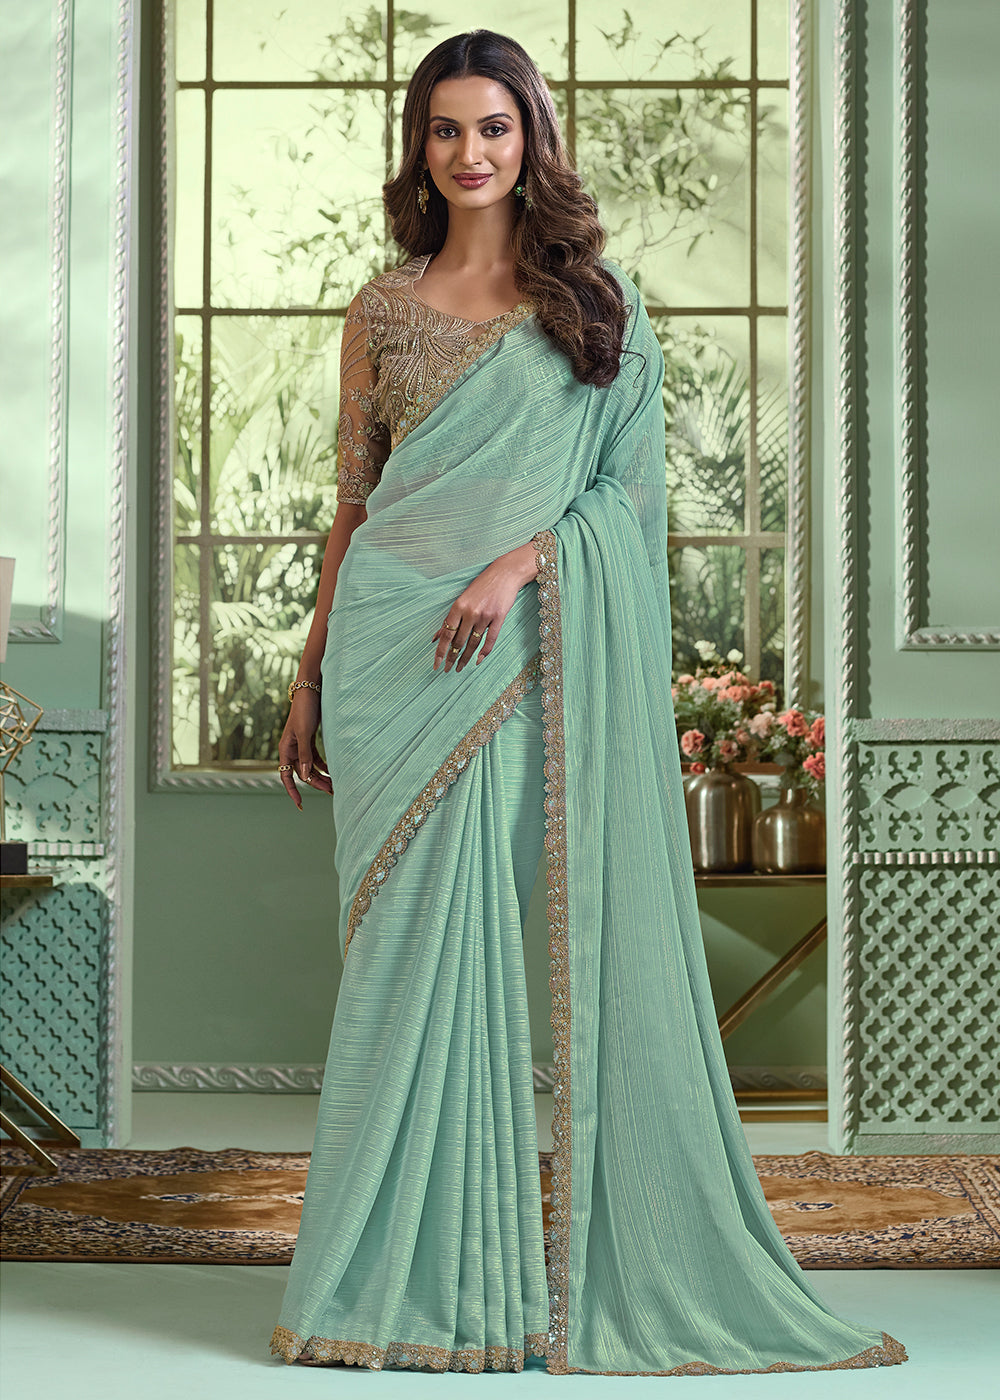 Buy Now Lovely Sky Blue Chiffon Embroidered Wedding Party Wear Saree Online in USA, UK, Canada & Worldwide at Empress Clothing.